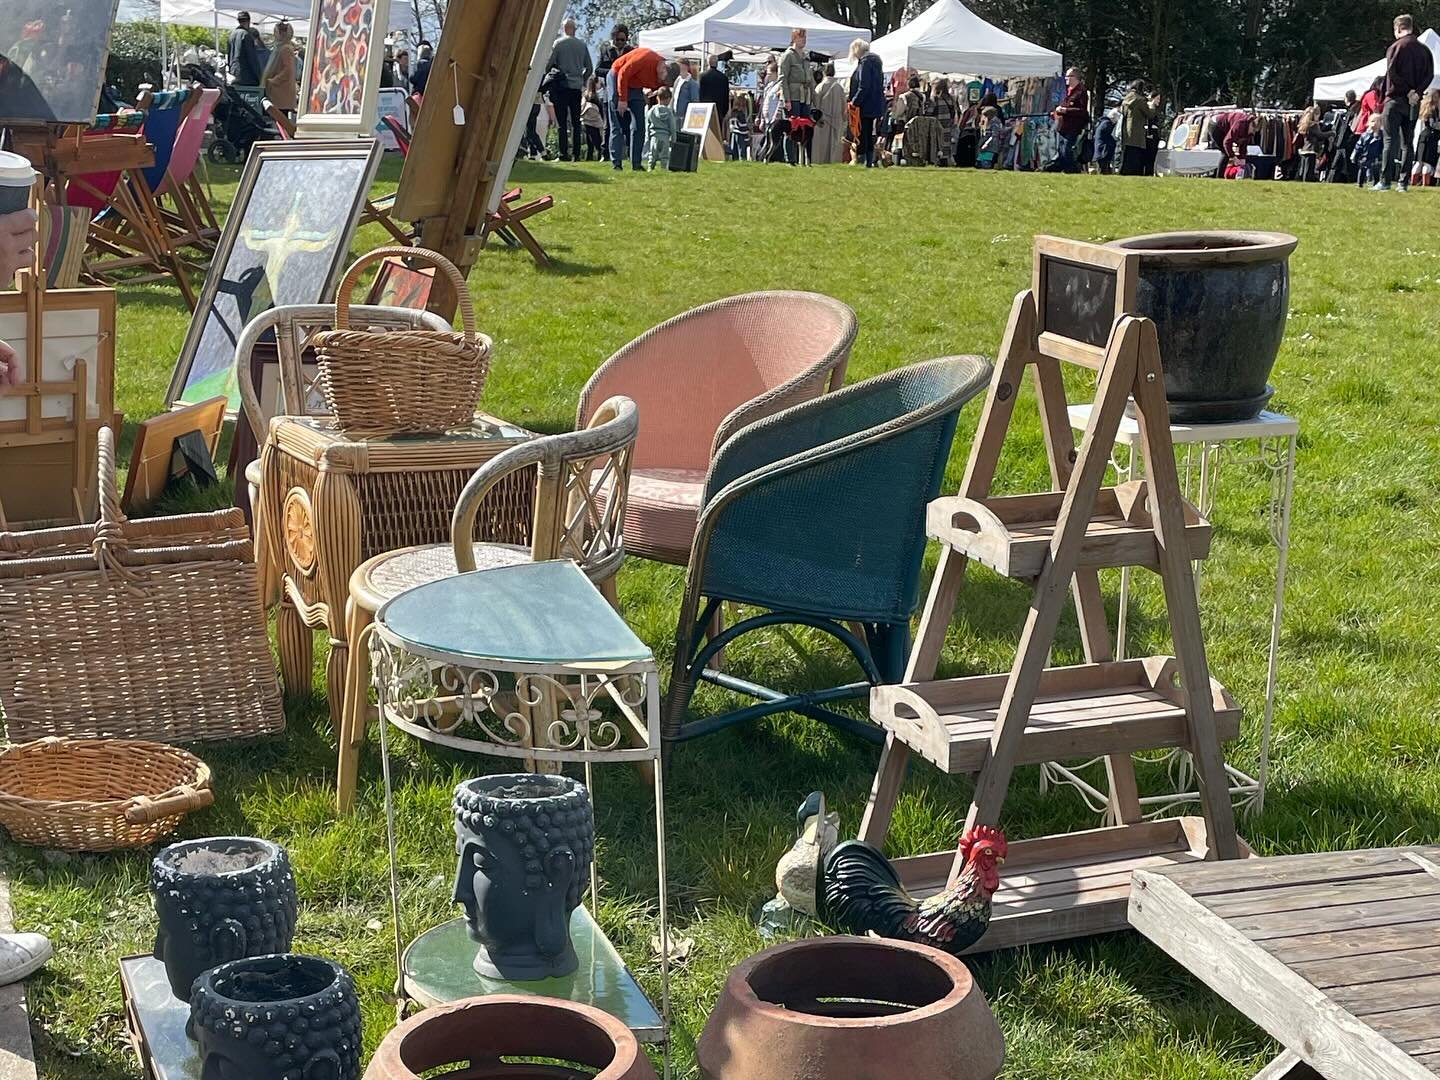 Tomorrow -
Vintage Market at the Mansion in Beckenham Place Park!
🌱🏛☀️ @beckenhamplace

With over 50 great vintage dealers in and around the Mansion, you&rsquo;ll find thousands of things to feast your eyes on, including mid 20th-century furniture,